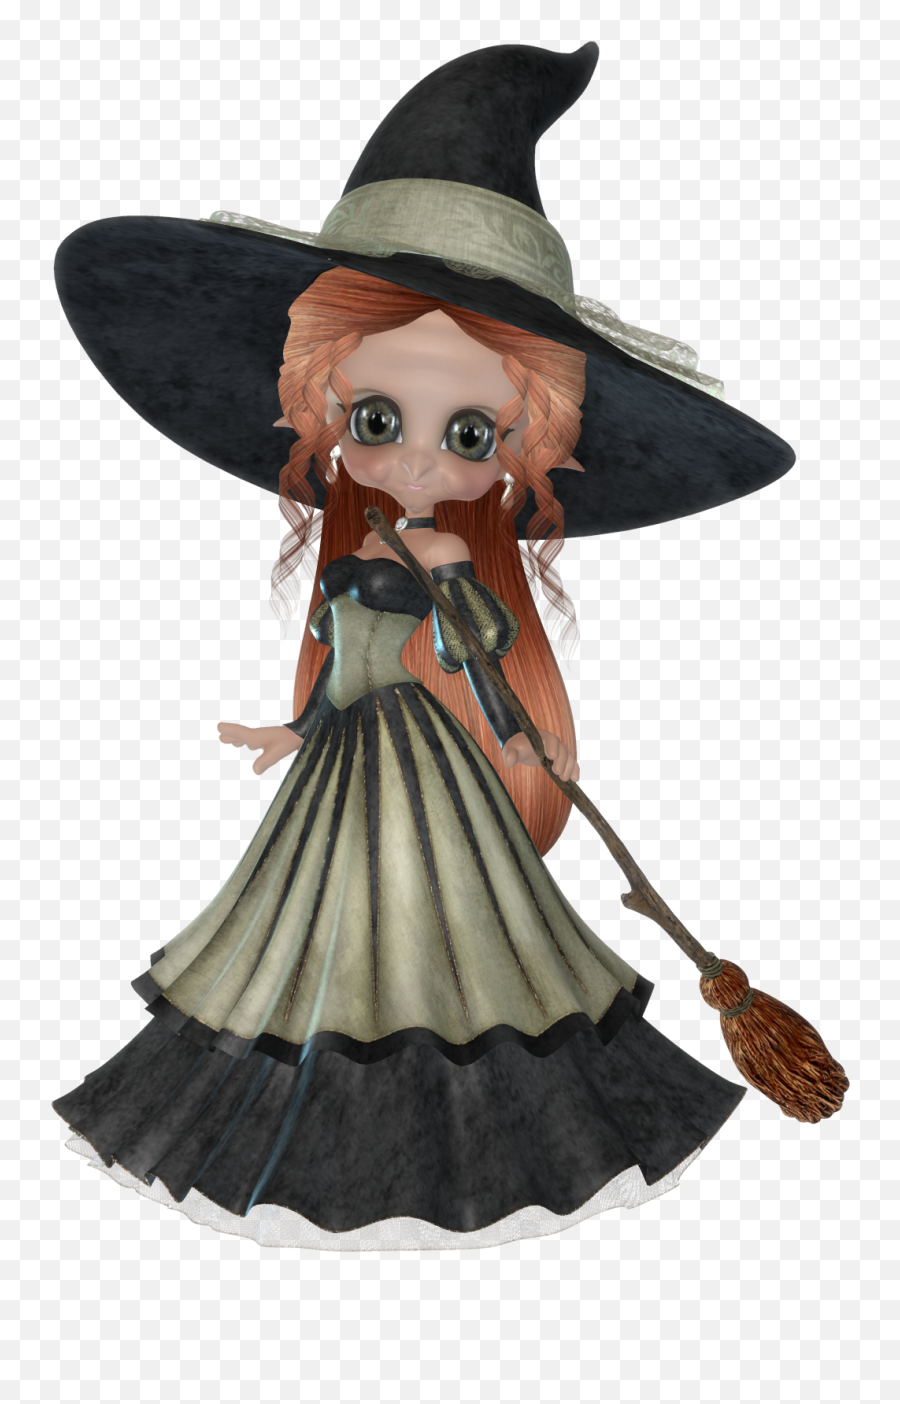 Witch Transparent Background - Witch Transparent Background Png,Transparent Witch